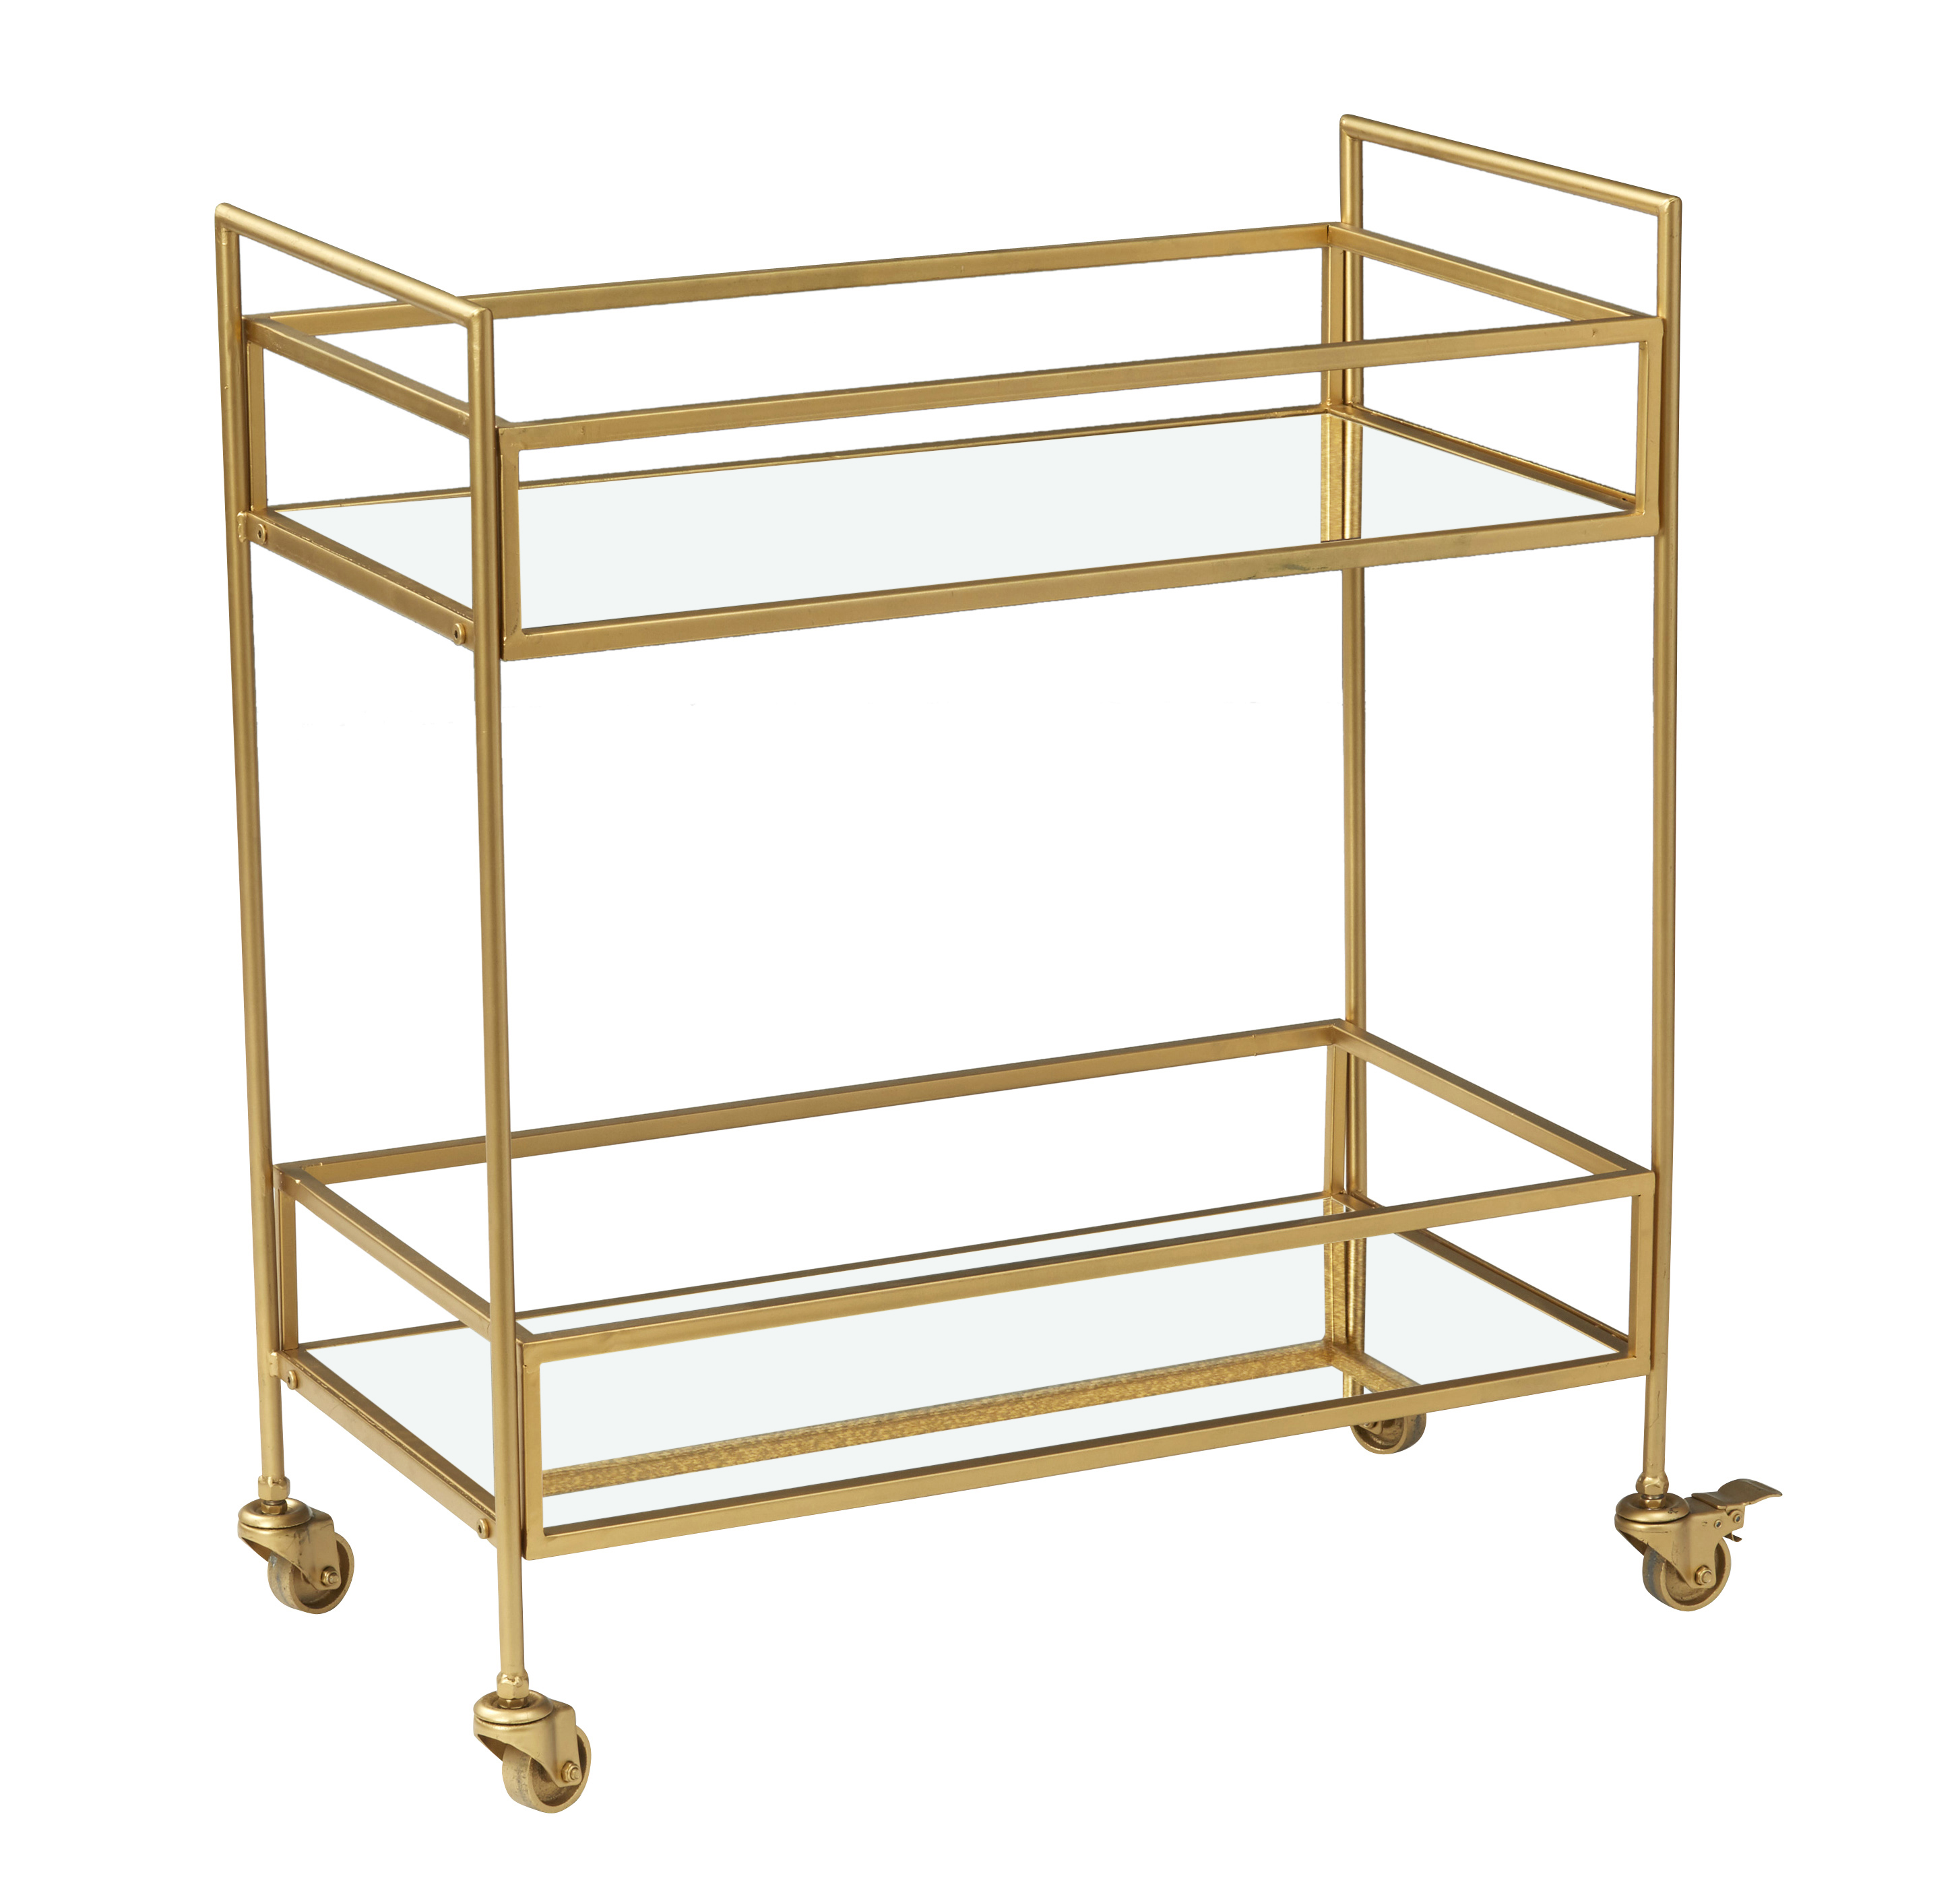 Fairmont Drinks Trolley Home Bar Cart Drink Display with Two Glass Shelves Gold